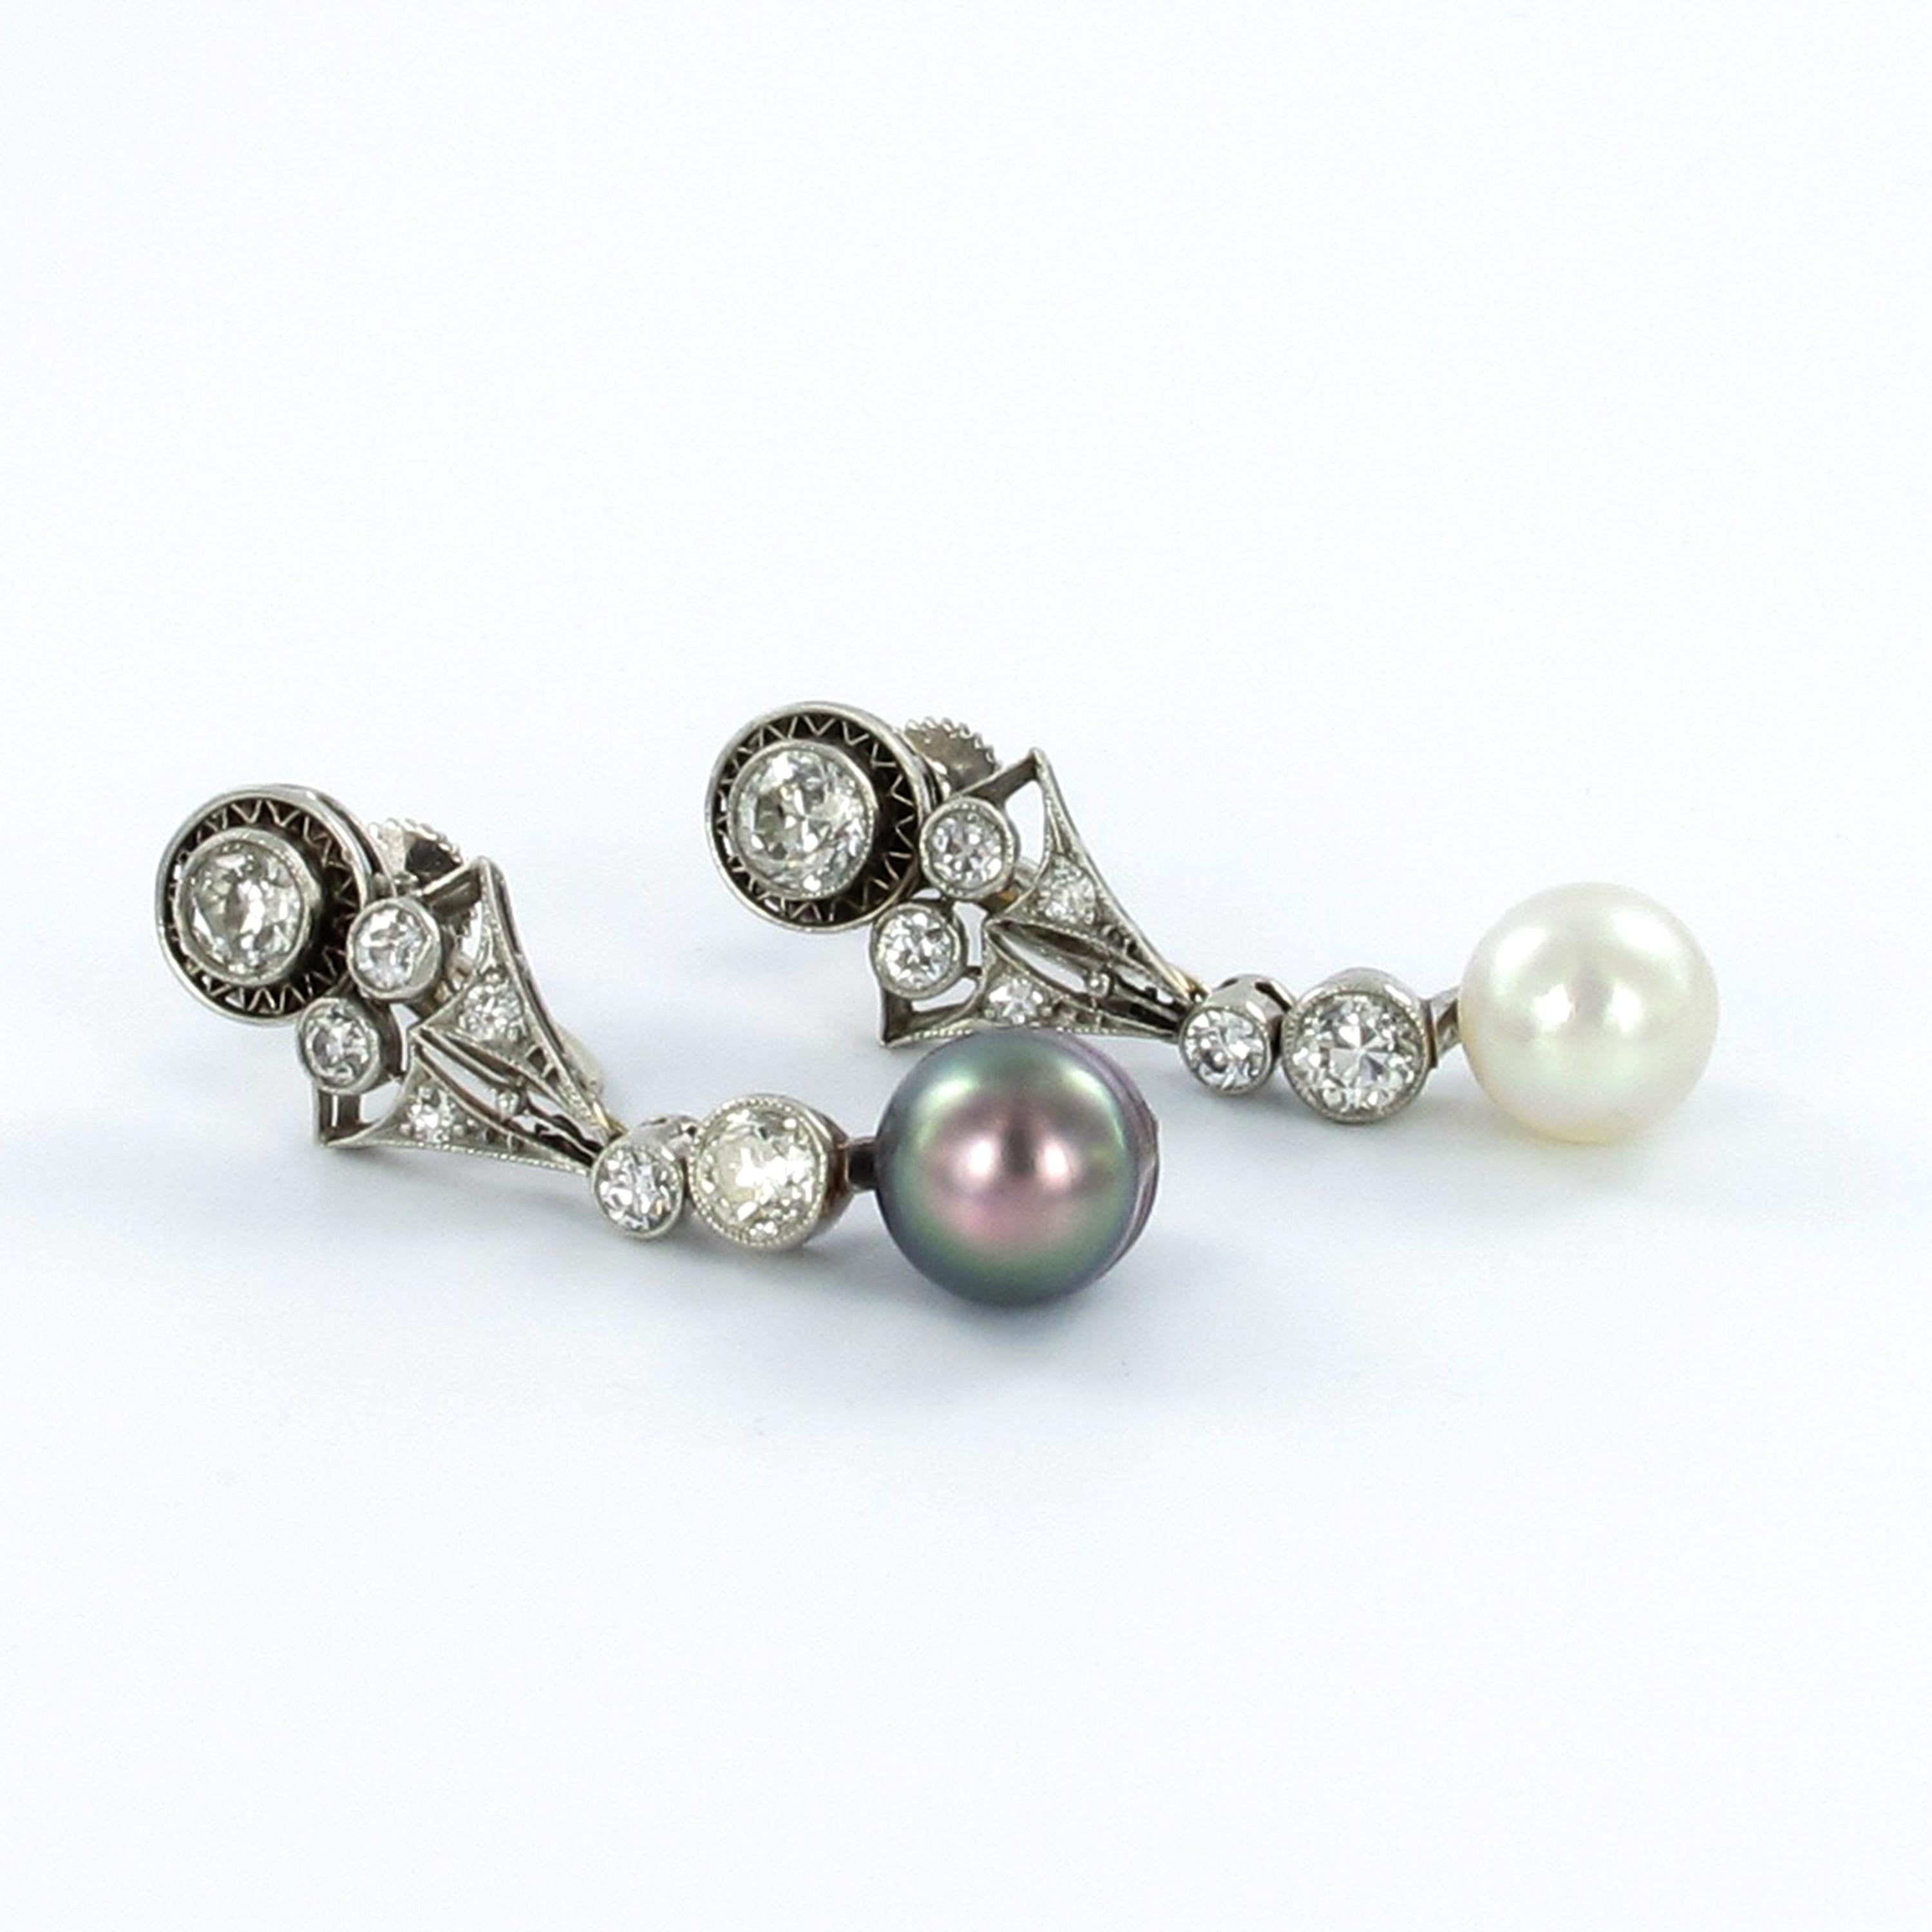 Beautiful Art Déco drop earrings in platinum 950. The jewel is set with one white and one gray natural saltwater pearl. The pearls are certified by Gübelin Gem Lab. Diameters of the pearls are 7.7 and 7.8 mm.
The earrings are further set with 14 old